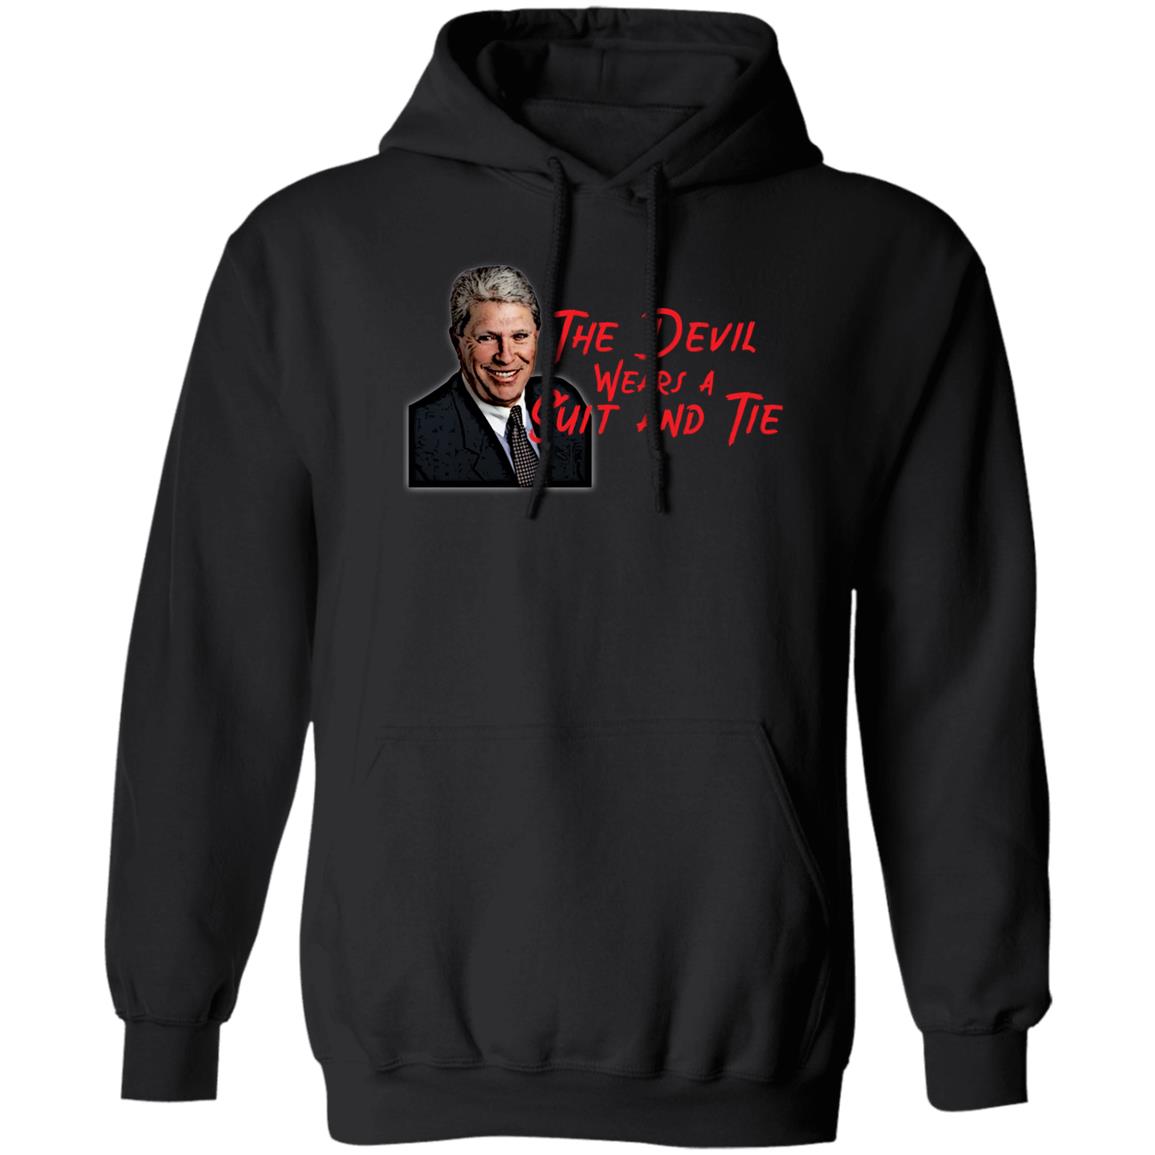 The Devil Wears a Suit and Tie Unisex Pullover Hoodie - Broken Knuckle Apparel